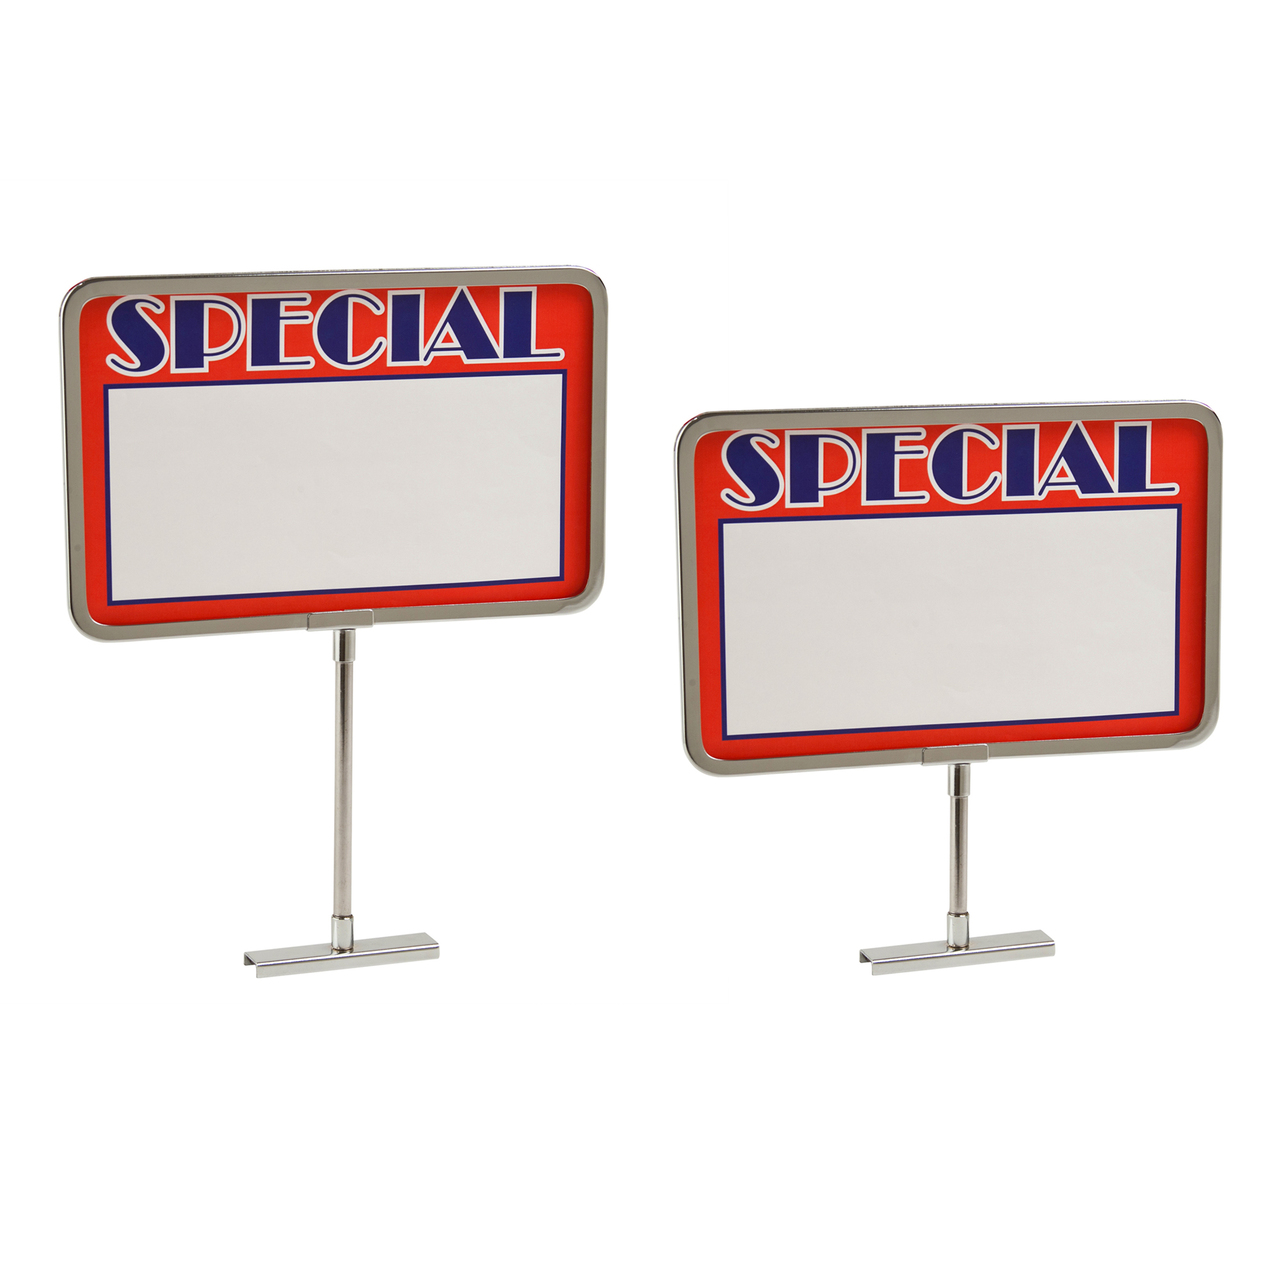 Chrome Magnetic Base Retail Sign Holder Store Fixtures Direct